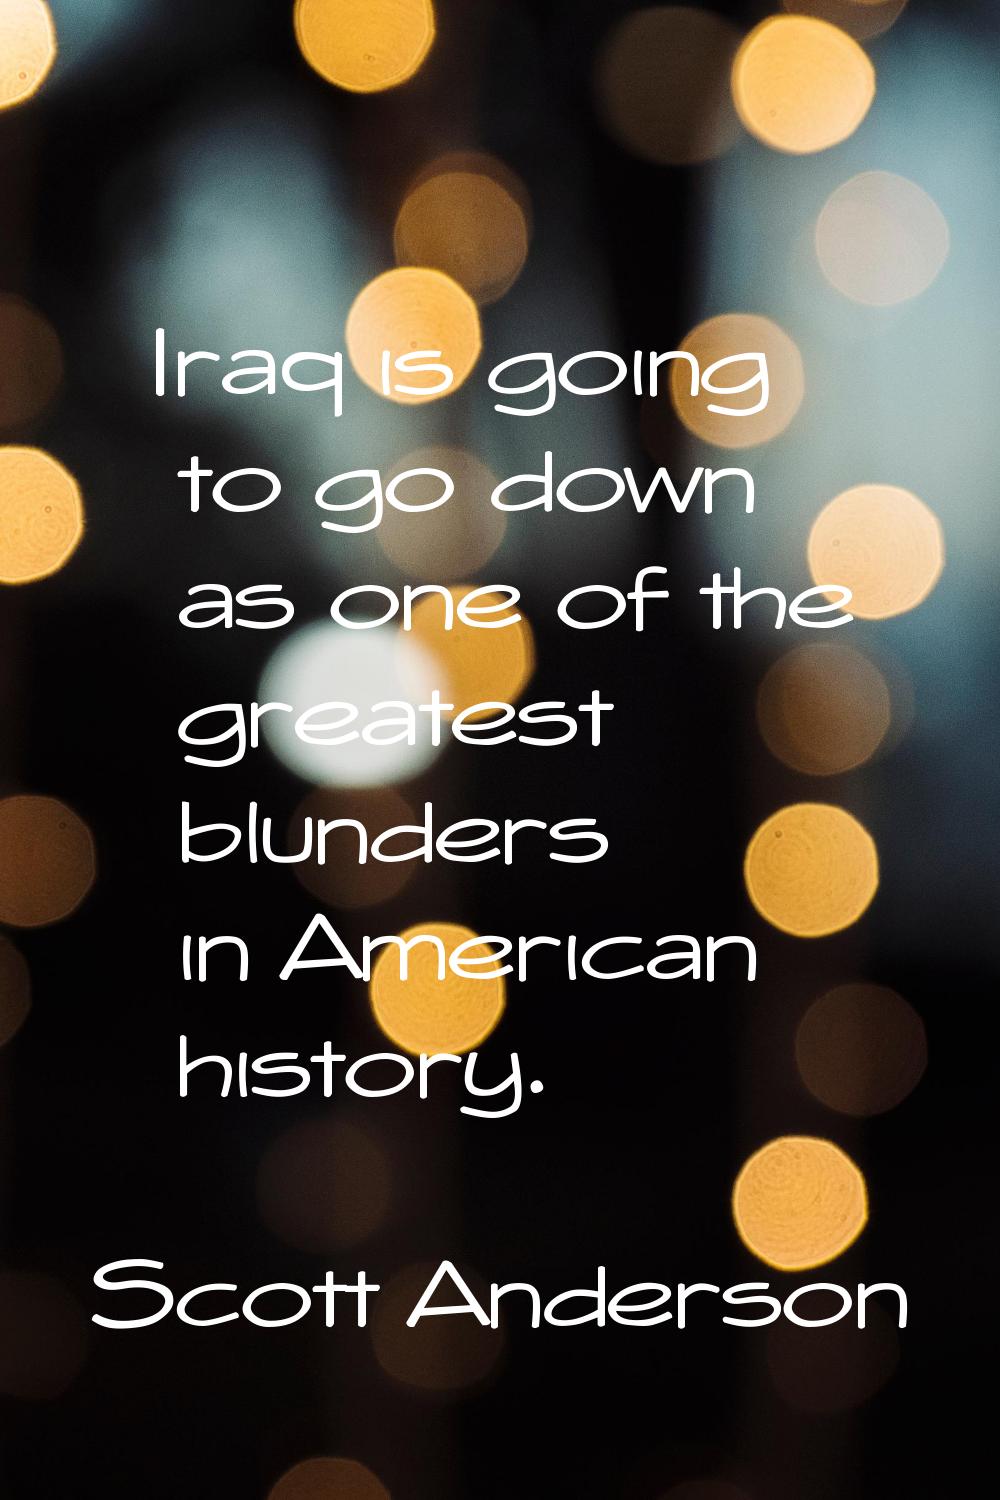 Iraq is going to go down as one of the greatest blunders in American history.